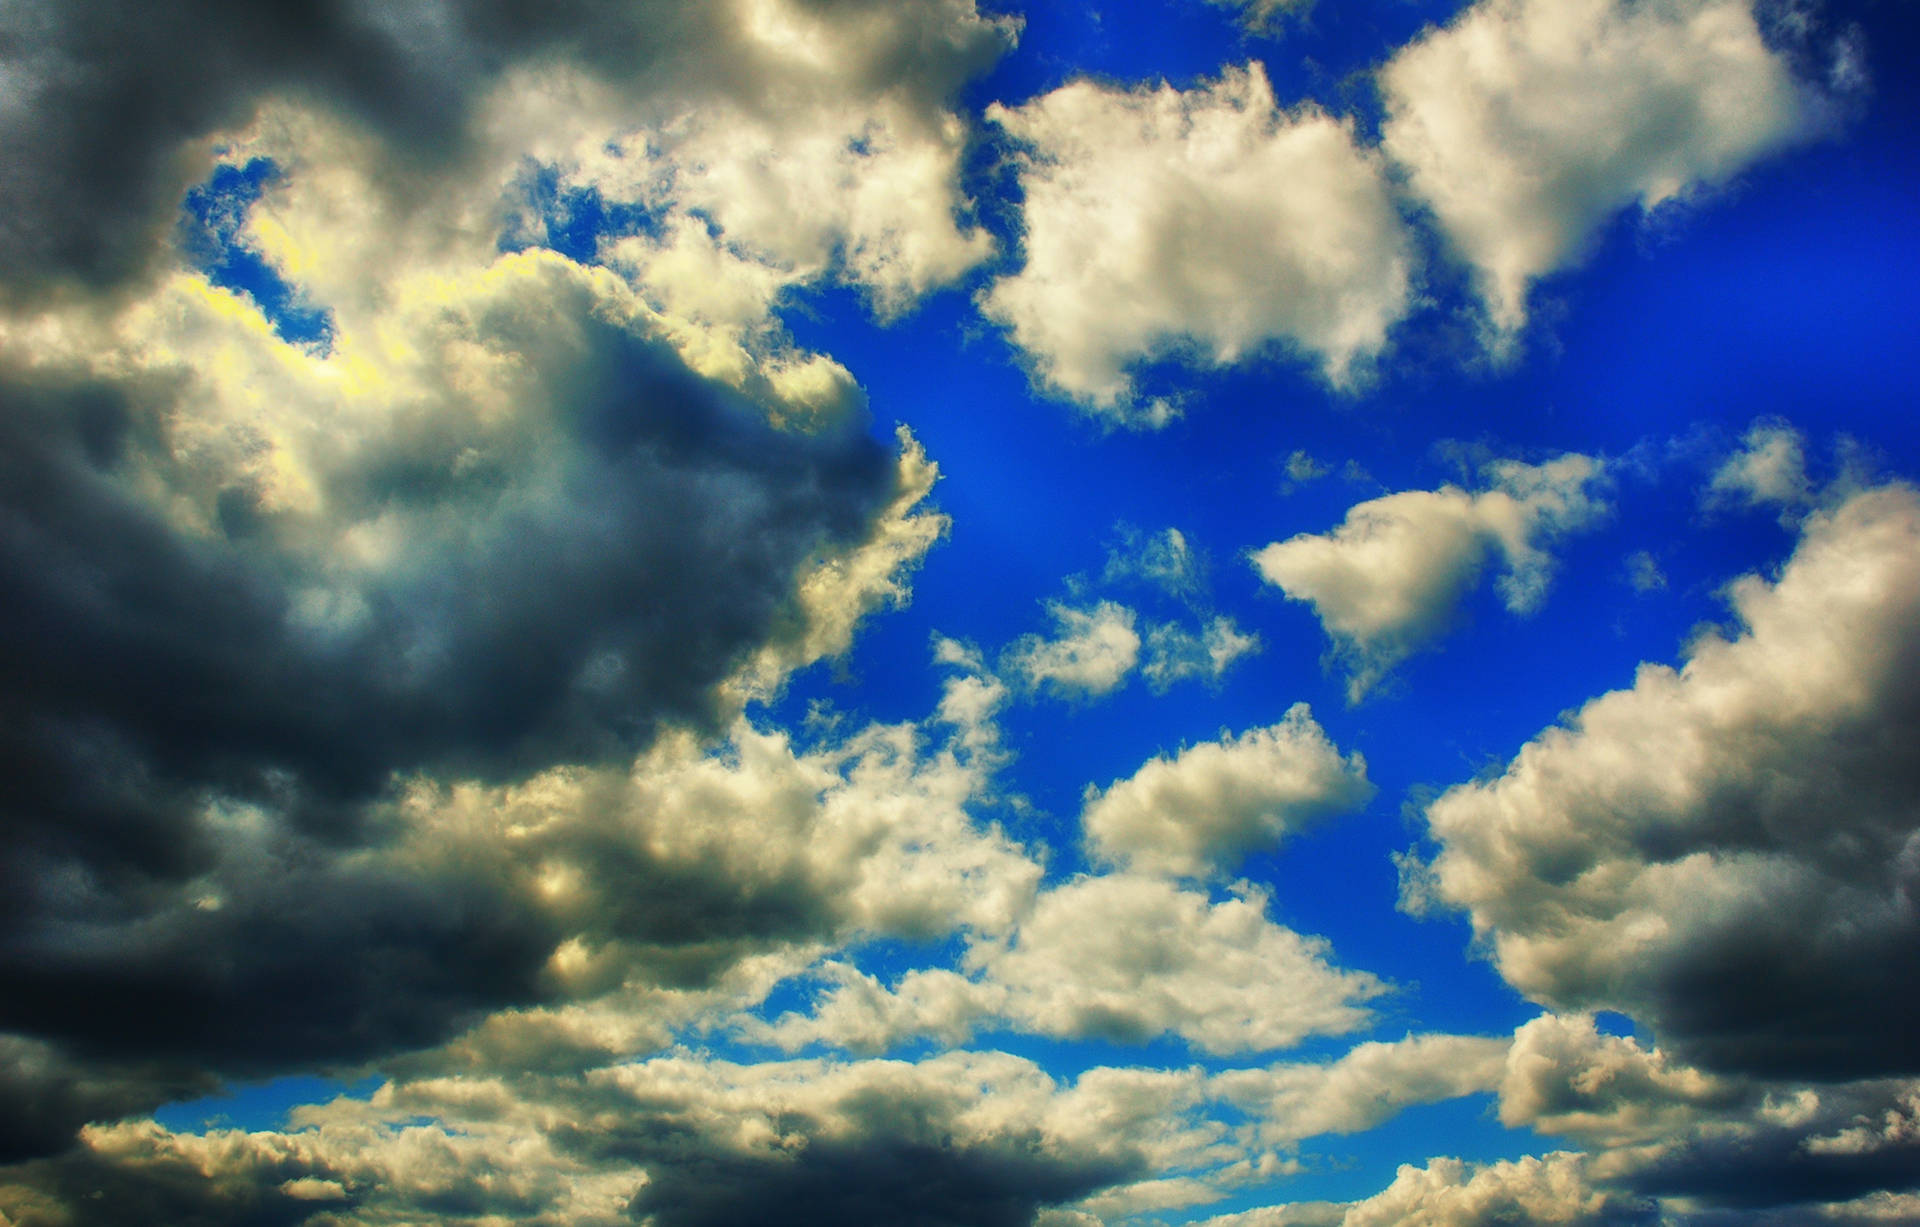 Saturated Clouds And Sky Hd Wallpaper